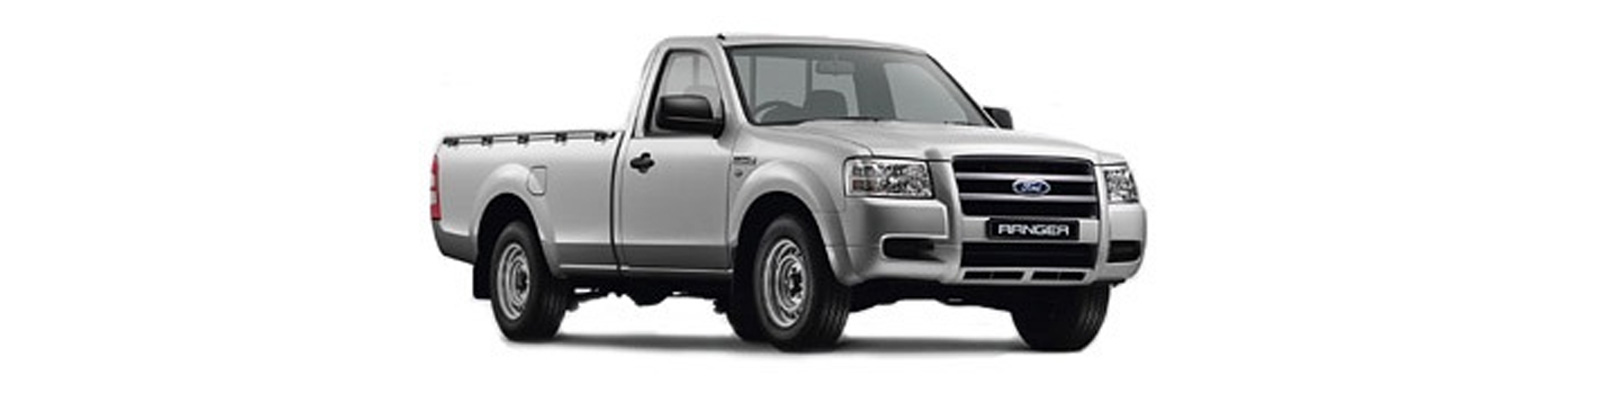 Accessories For The Ford Ranger Regular Cab 2006 to 2010